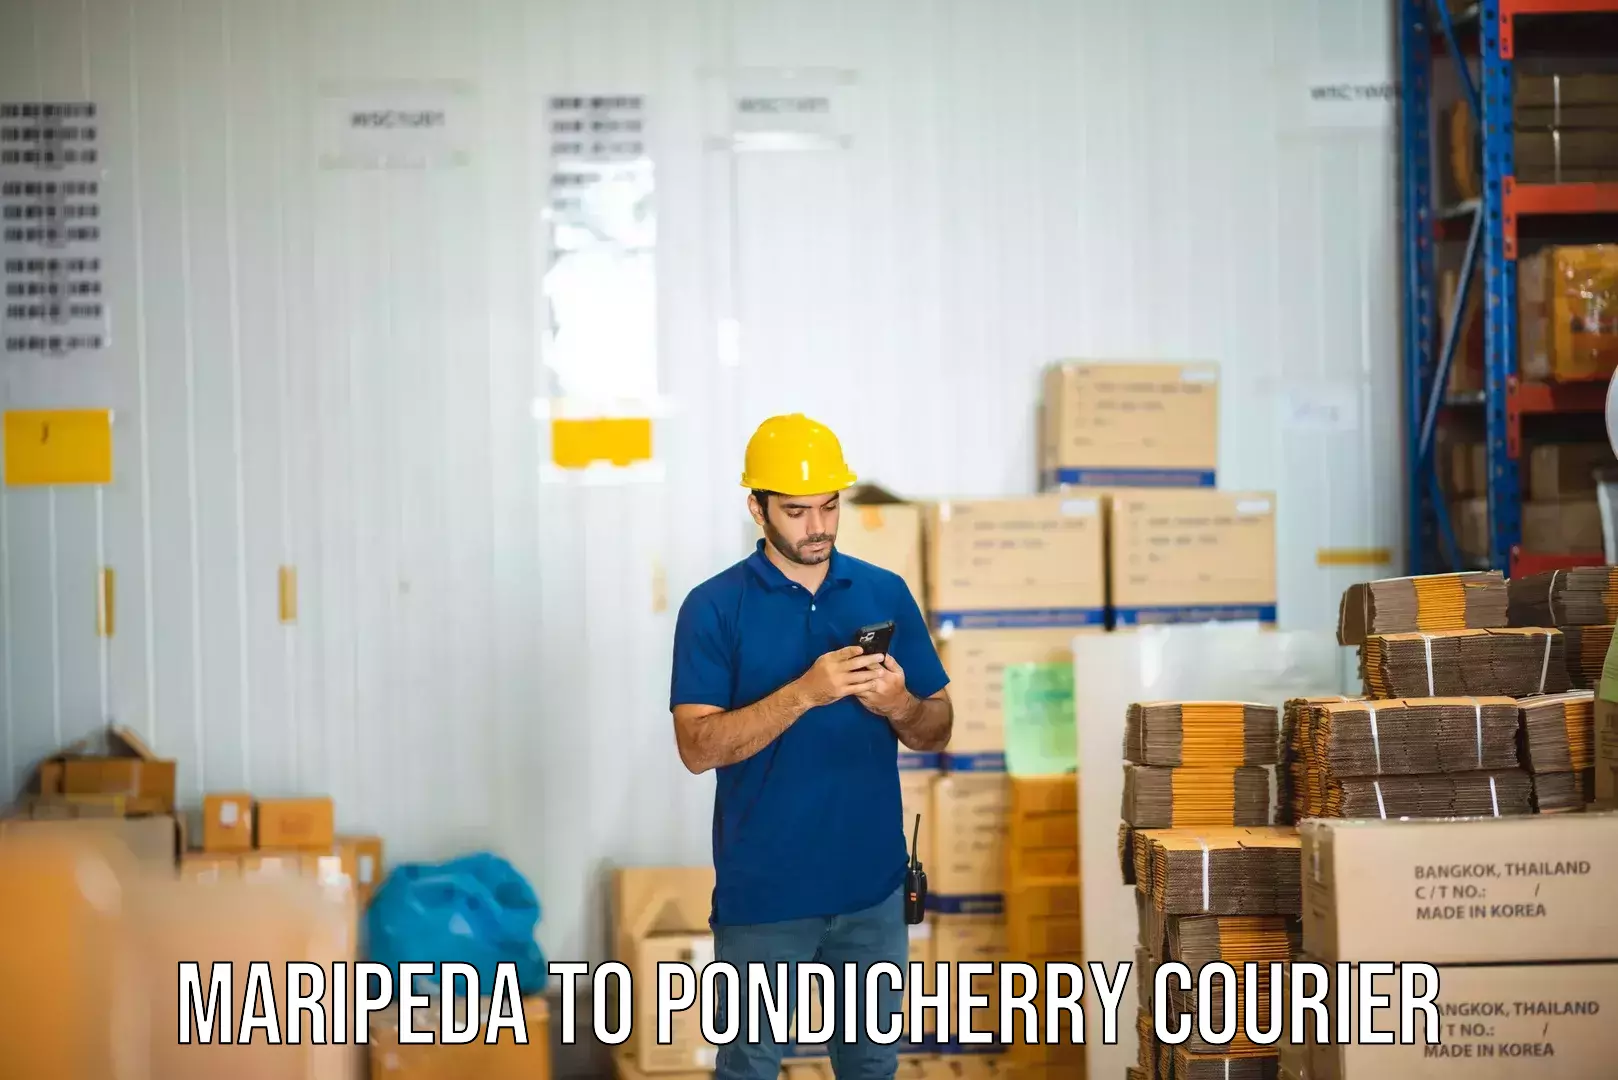 Efficient courier operations Maripeda to Pondicherry University